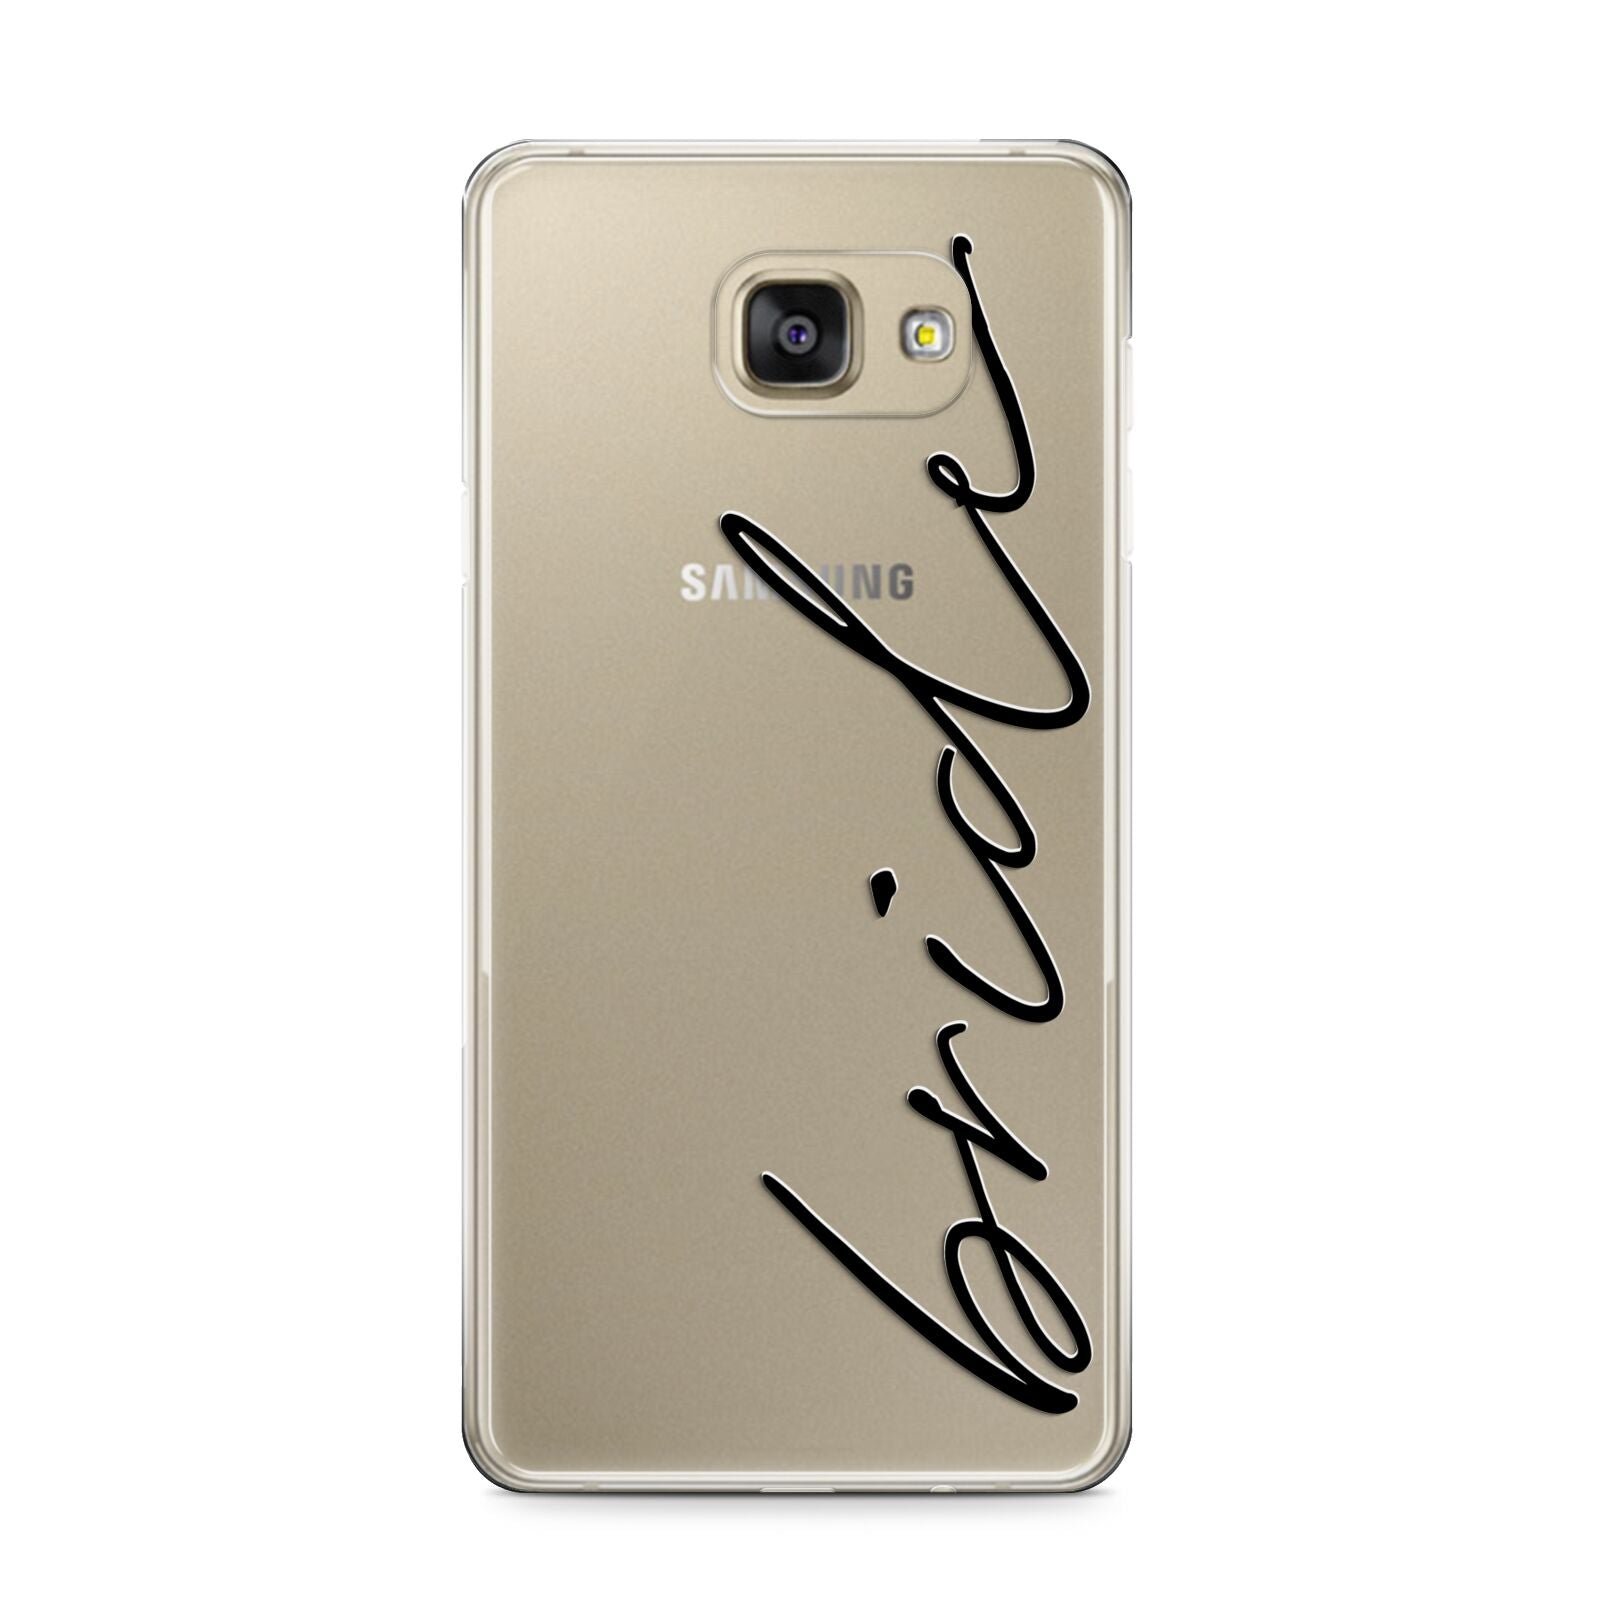 The Bride Samsung Galaxy A9 2016 Case on gold phone